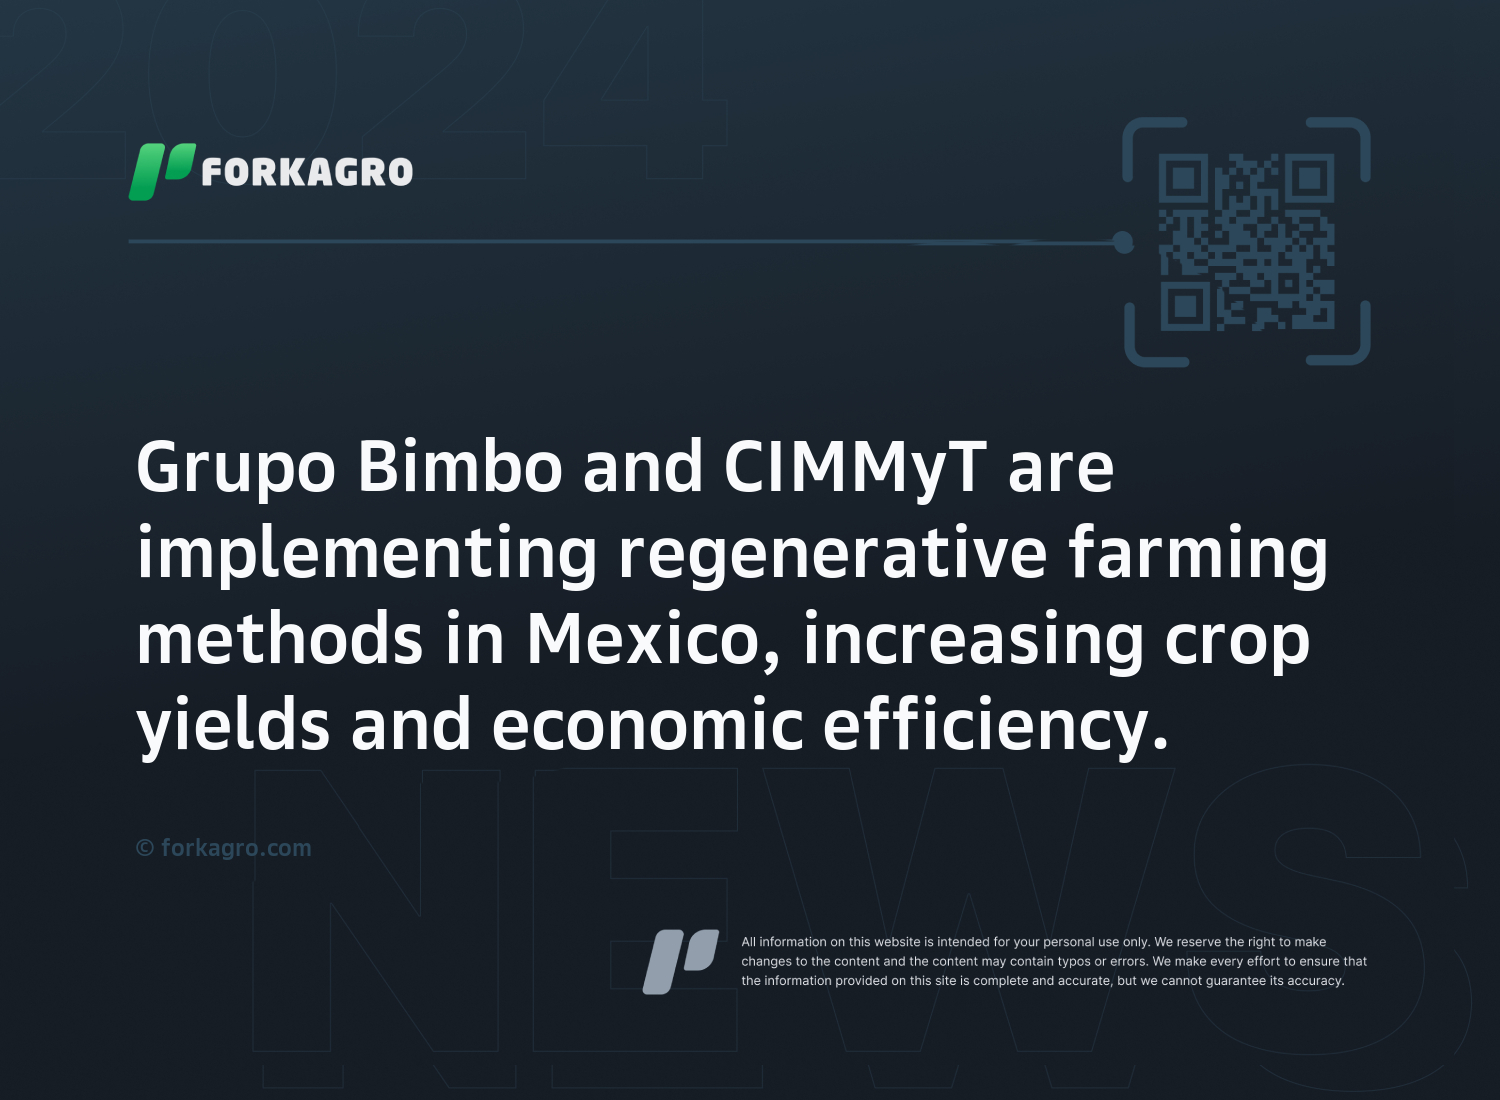 Grupo Bimbo and CIMMyT are implementing regenerative farming methods in Mexico, increasing crop yields and economic efficiency.